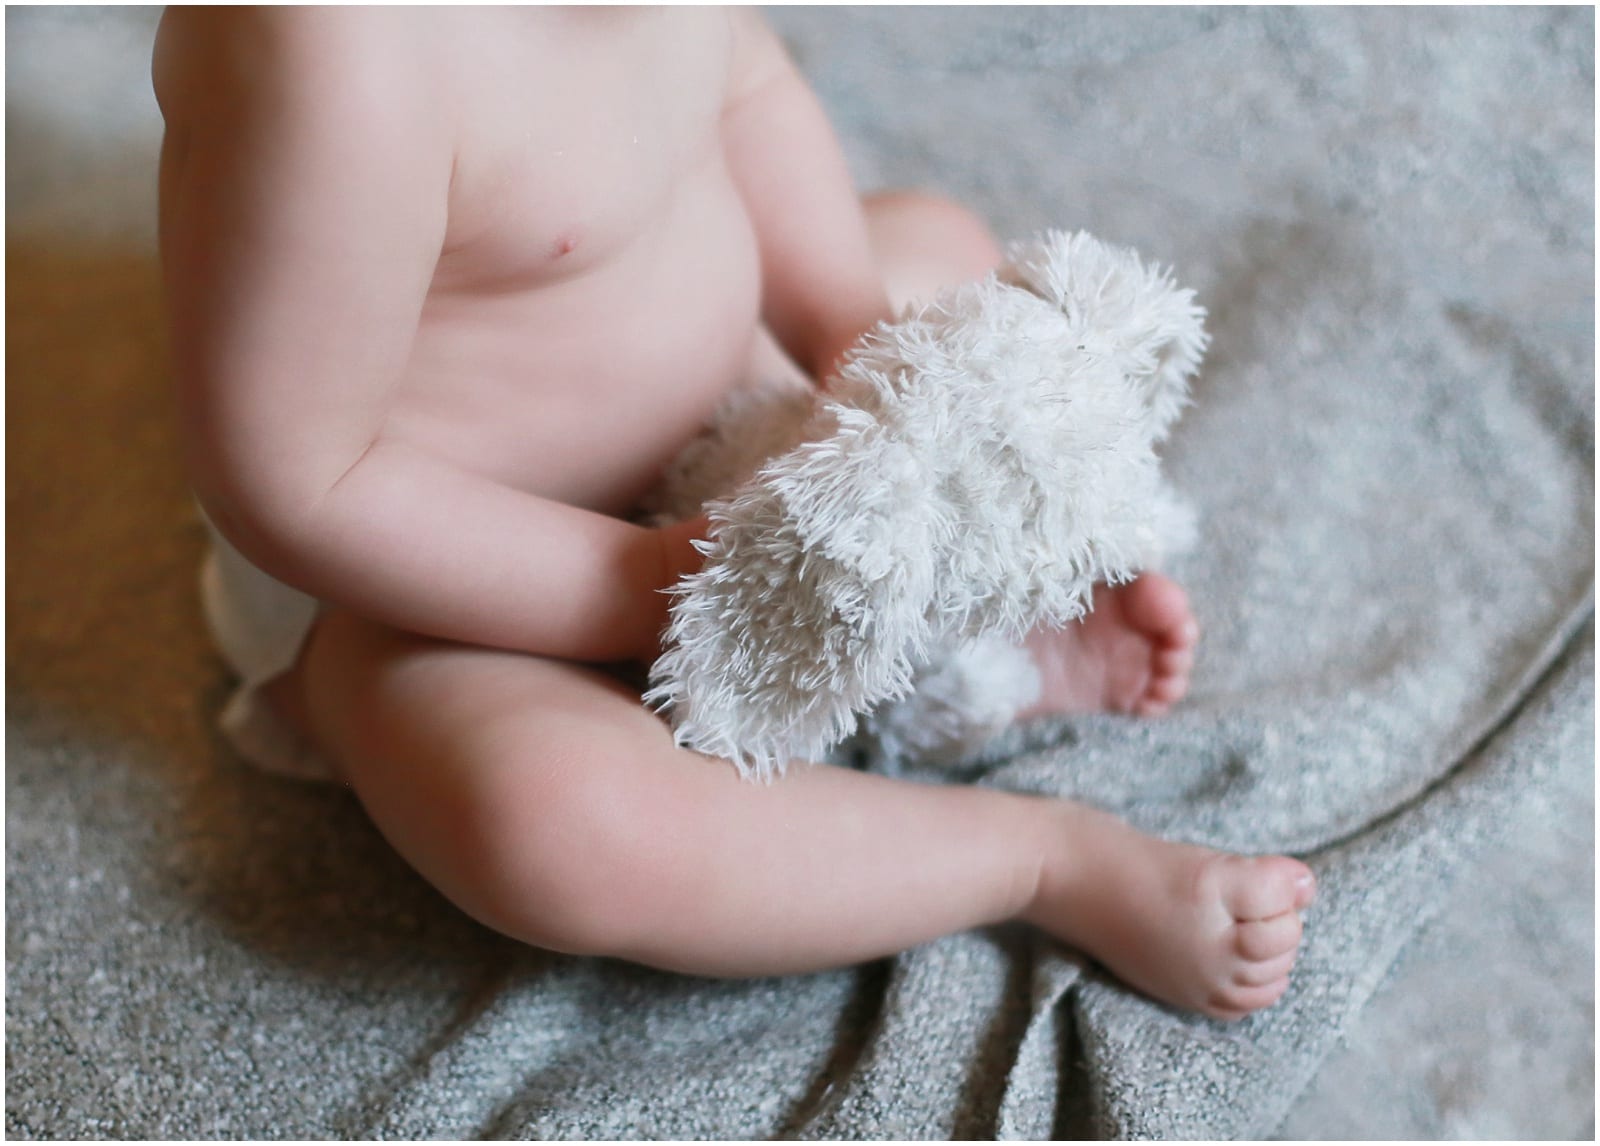 Helena Woods, Children's photographer, shares a few sneak peeks from a recent at home baby milestone session in Strasbourg France. Children's Photographer